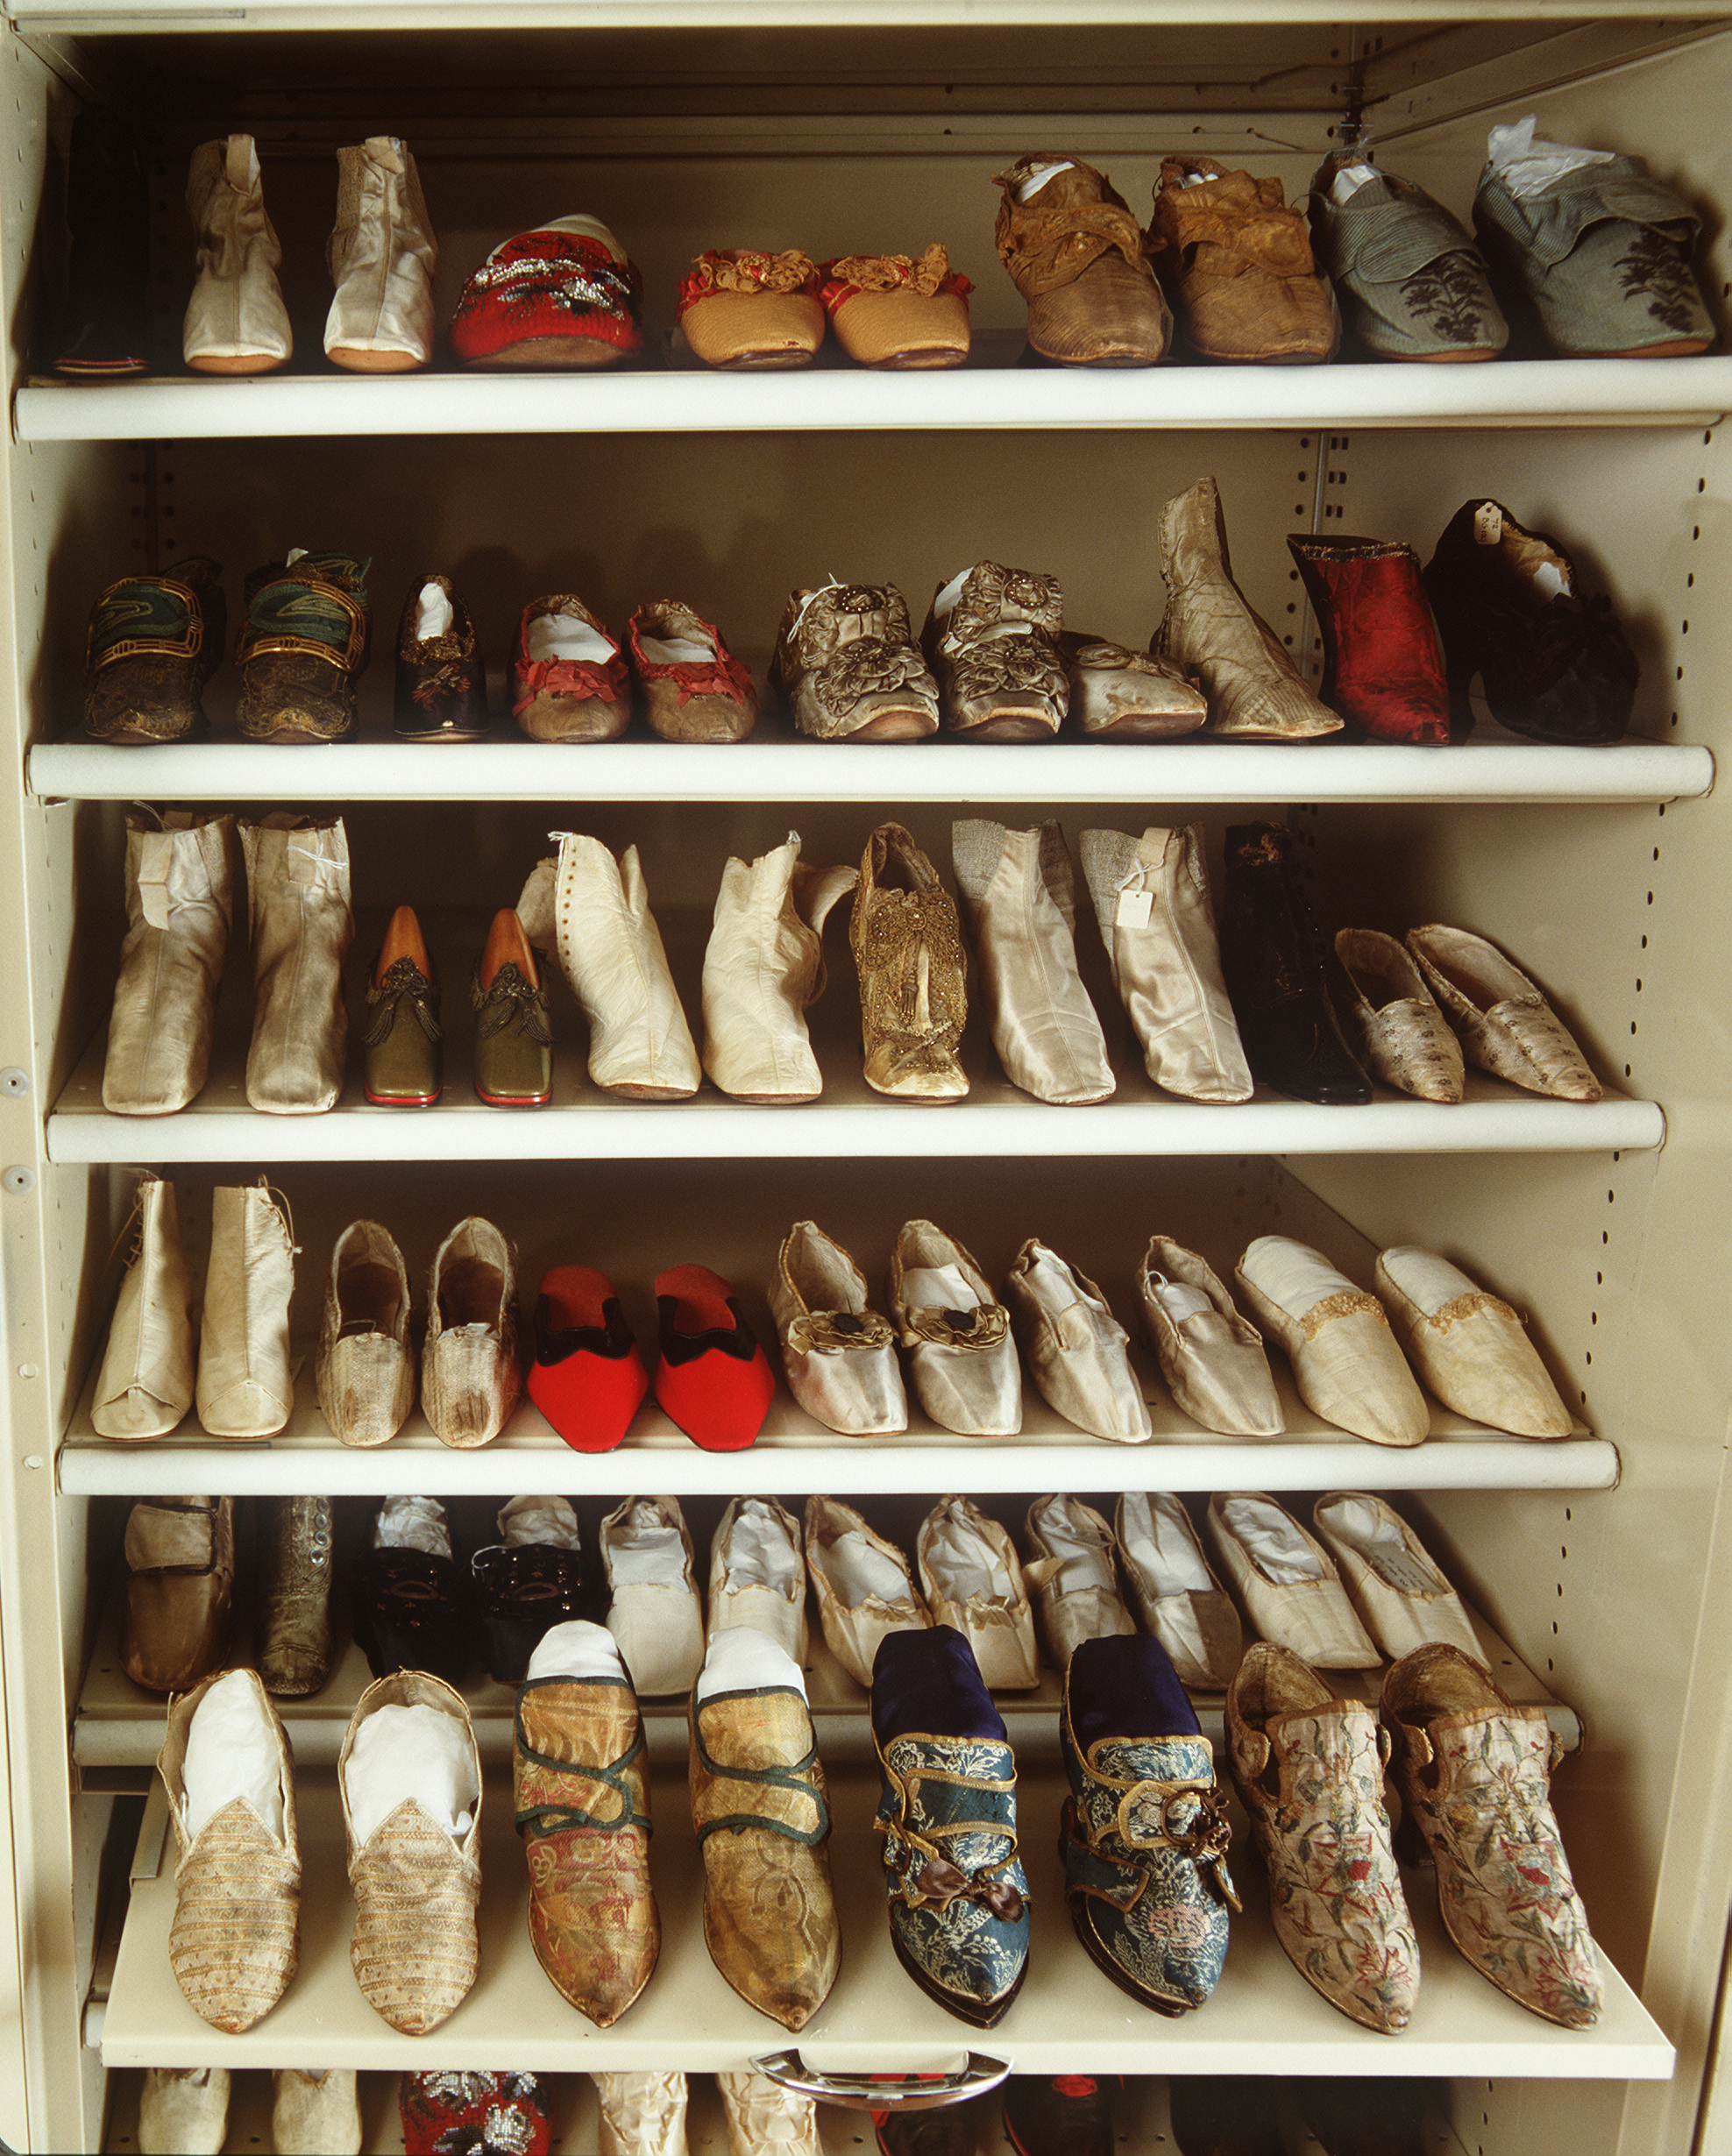 Joseph Box collection of shoes and objects related to shoemaking